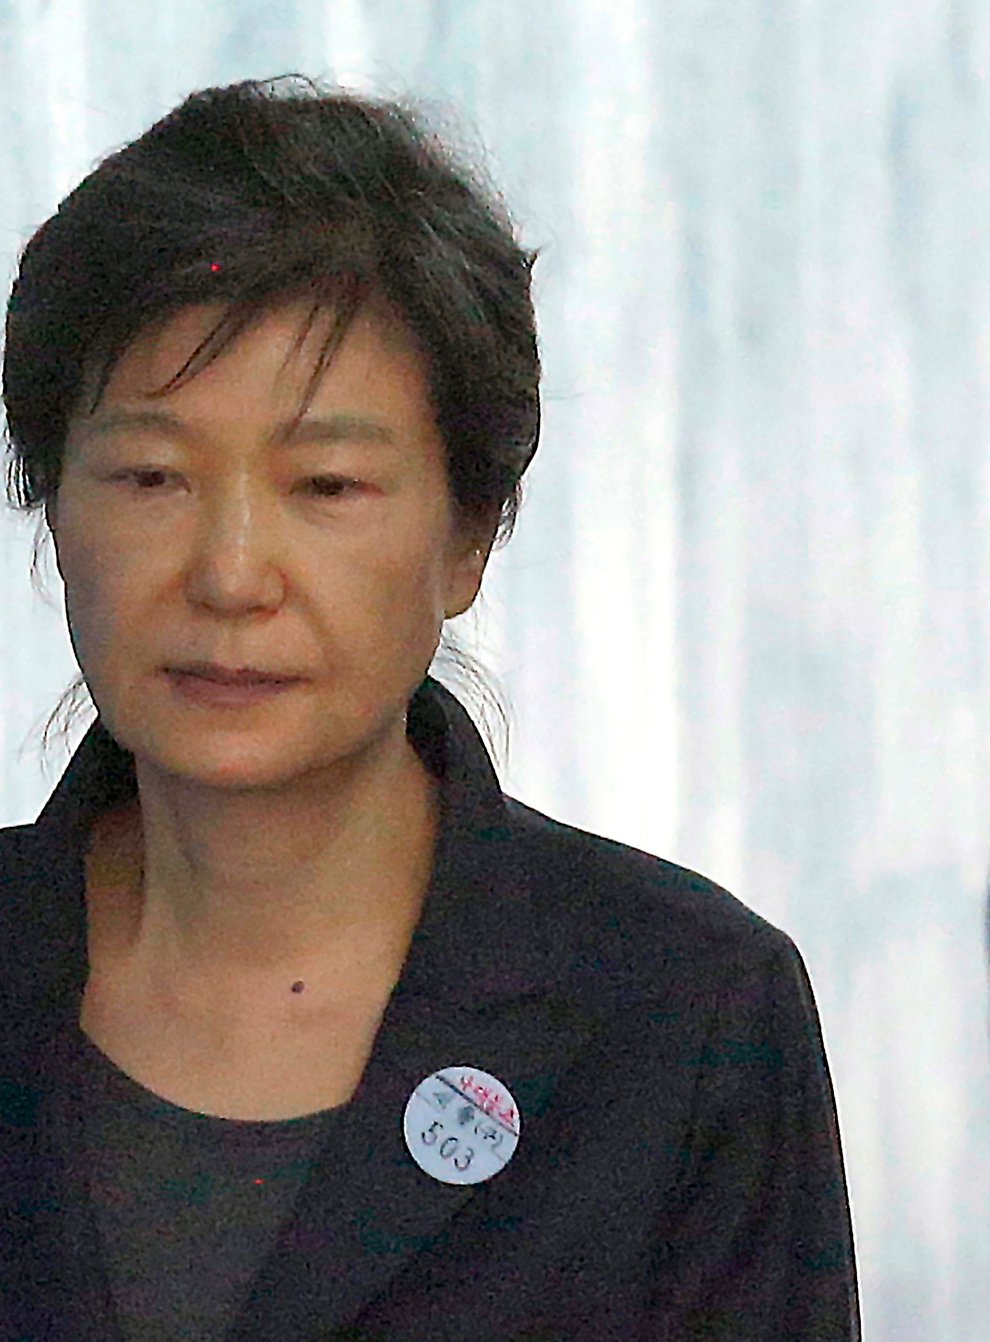 South Korea will grant a special pardon to former president Park Geun-hye, who is serving a lengthy prison term for bribery and other crimes (Ahn Young-joon/AP)